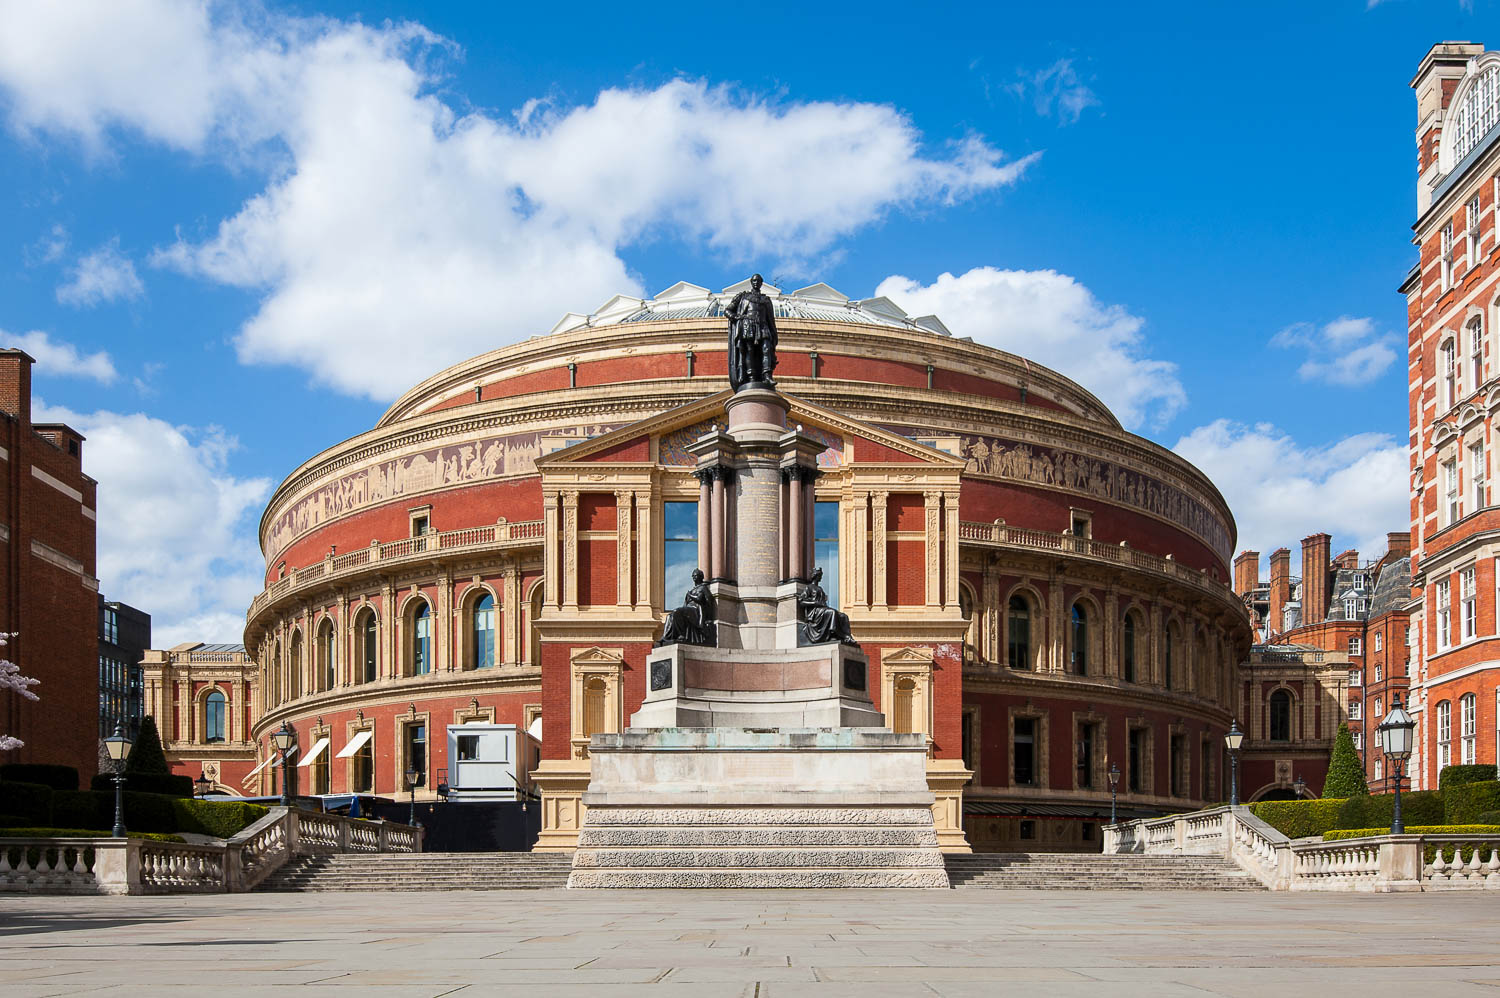 London's Royal Albert Hall in South Kensington - home to several of the city's main museums, this area is also home to some great family hotels in London